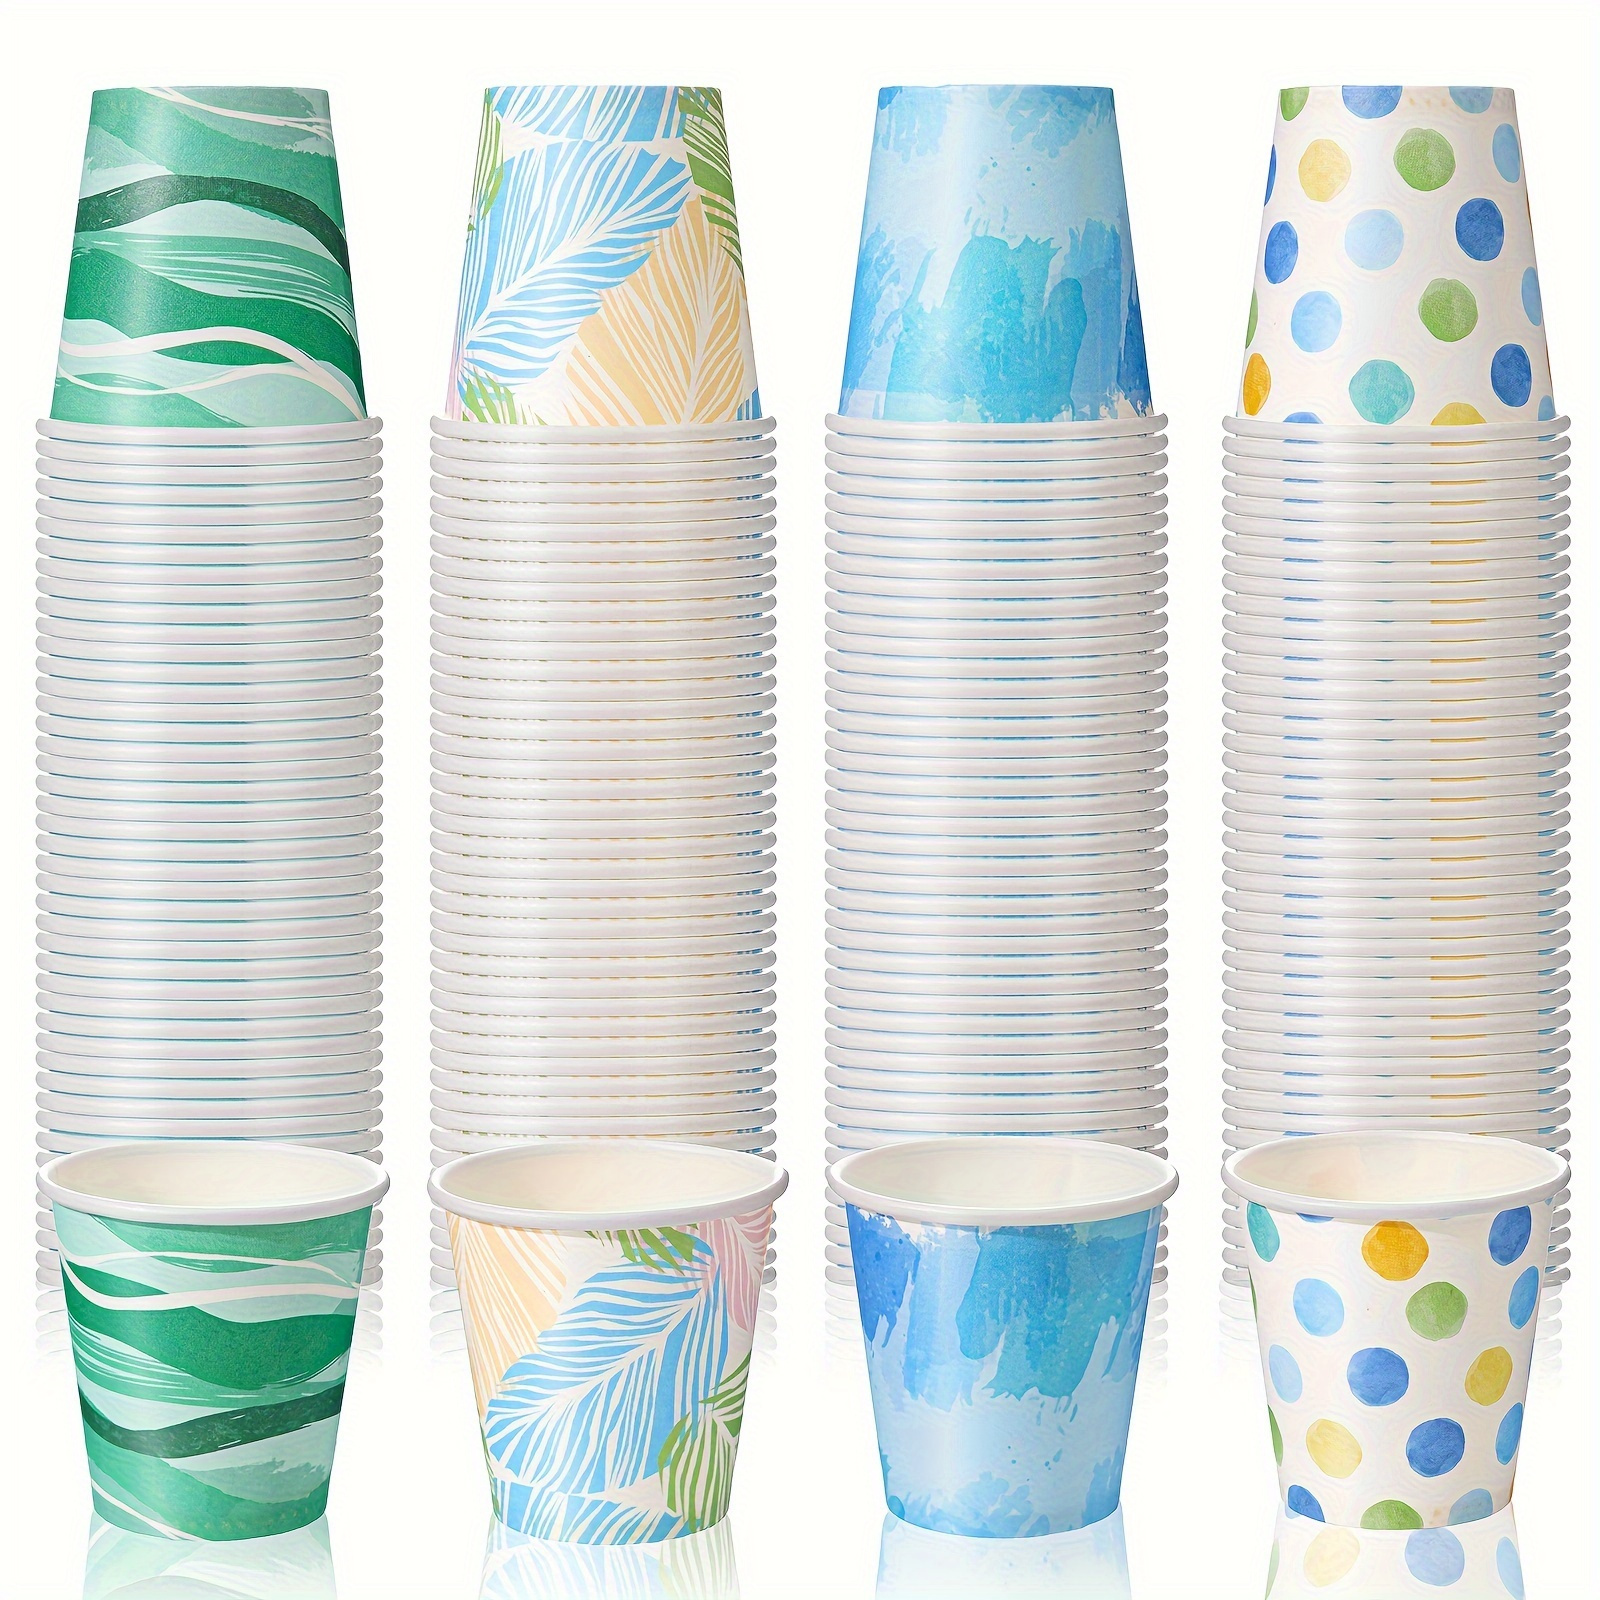 

100/200/300/600pcs 3 Oz Paper Cups, Disposable Bathroom Cups, Blue & Green Small Mouthwash Cups, Espresso Cups, Disposable Drinking Cups For Party, Picnic, Bbq, Travel, And Event